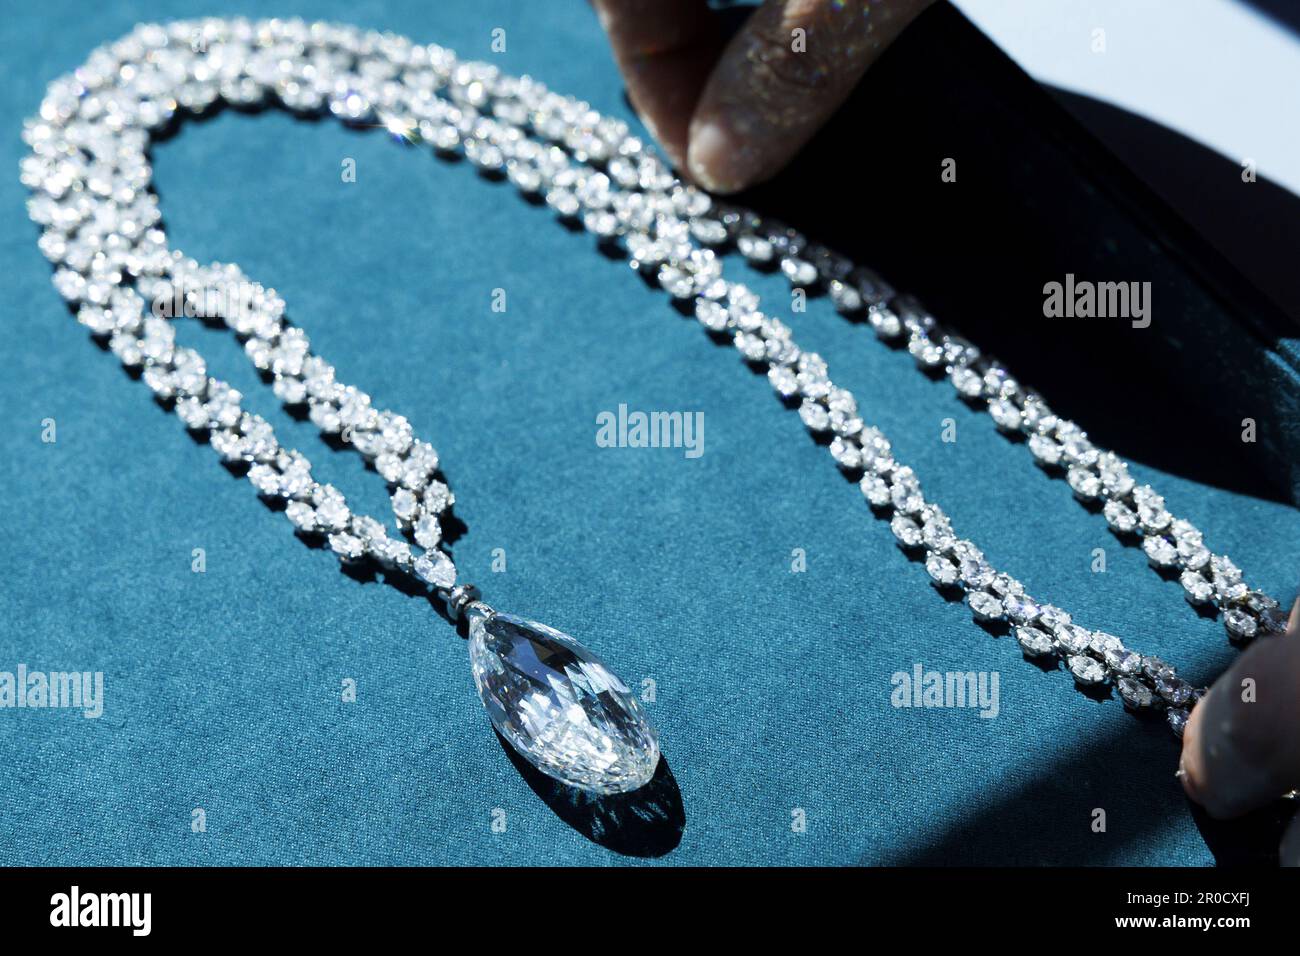 A 90.36 carat Briolette of India Diamond Necklace by Harry Winston,  estimated between 9,000,000 - 14,000,000 CHF (Swiss Francs), is pictured,  during a preview of "The World of Heidi Horten" the 700